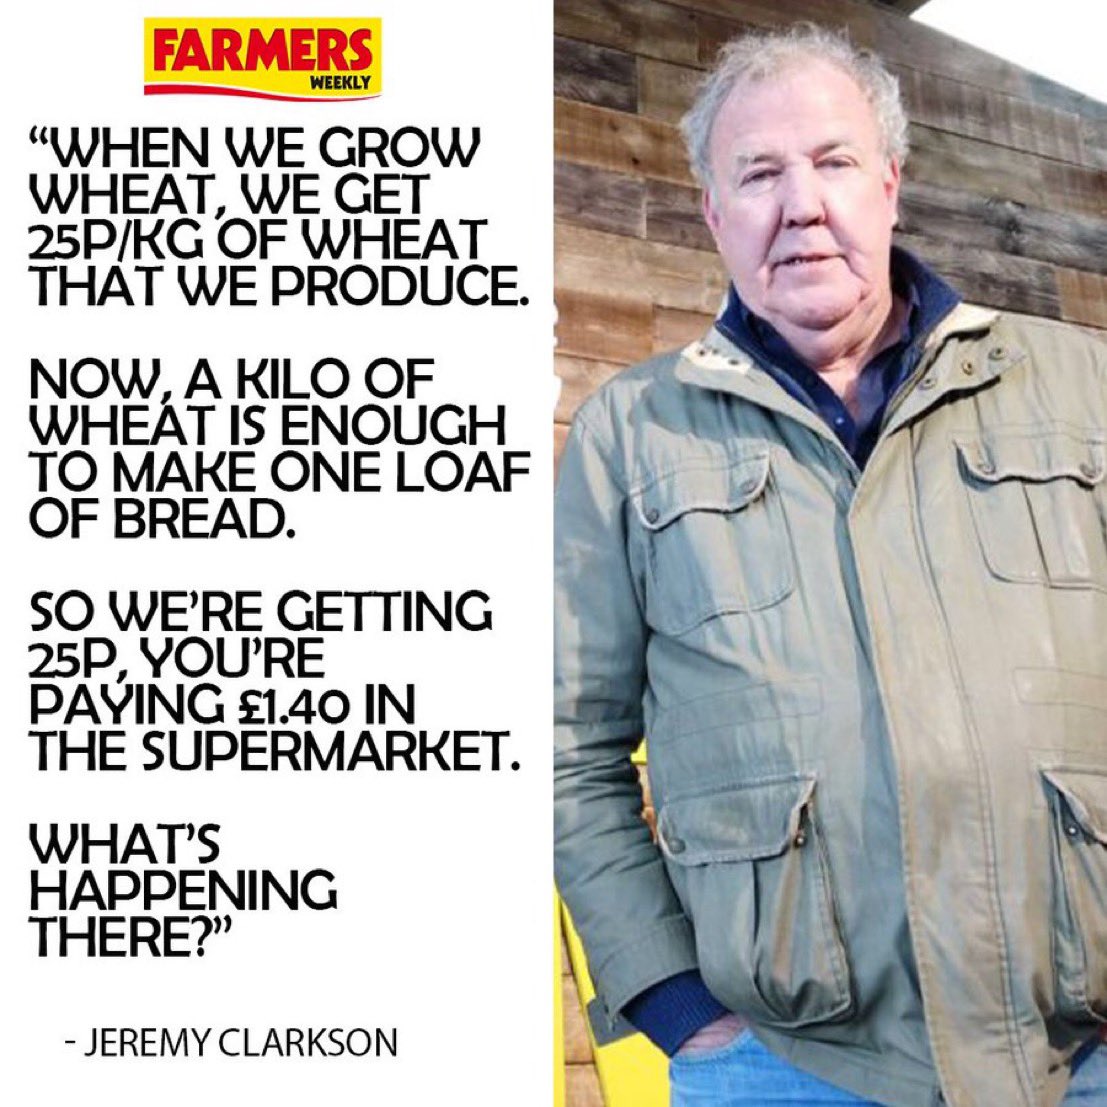 “Jeremy Clarkson has questioned how so little of the money in the food supply chains ends up in farmers’ hands when they are taking most of the risk.” ~ @FarmersWeekly